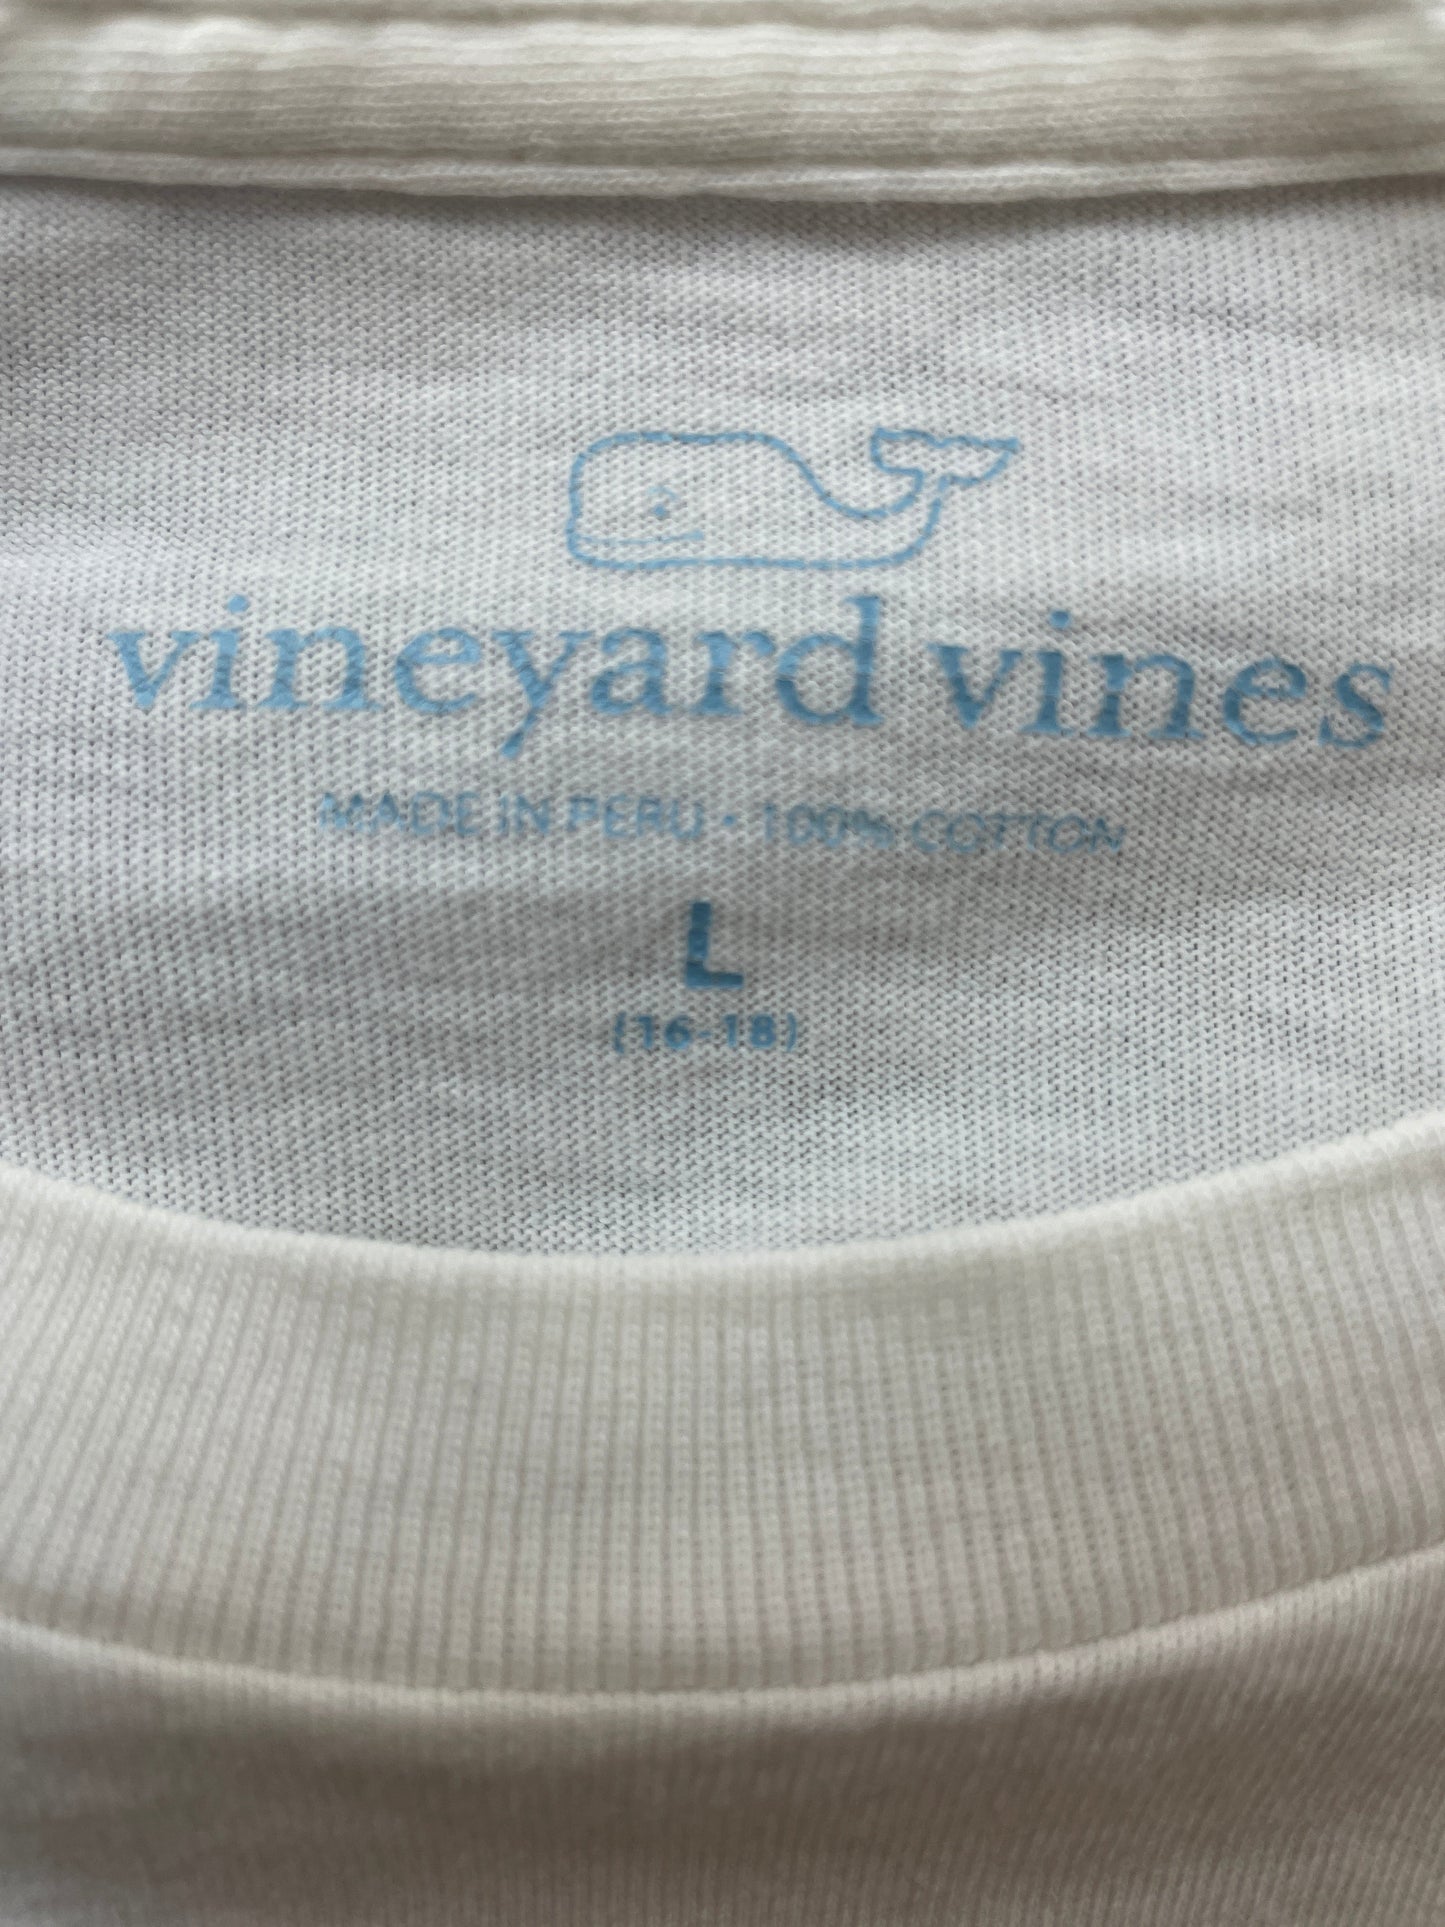 White Top Long Sleeve By Vineyard Vines, Size: L